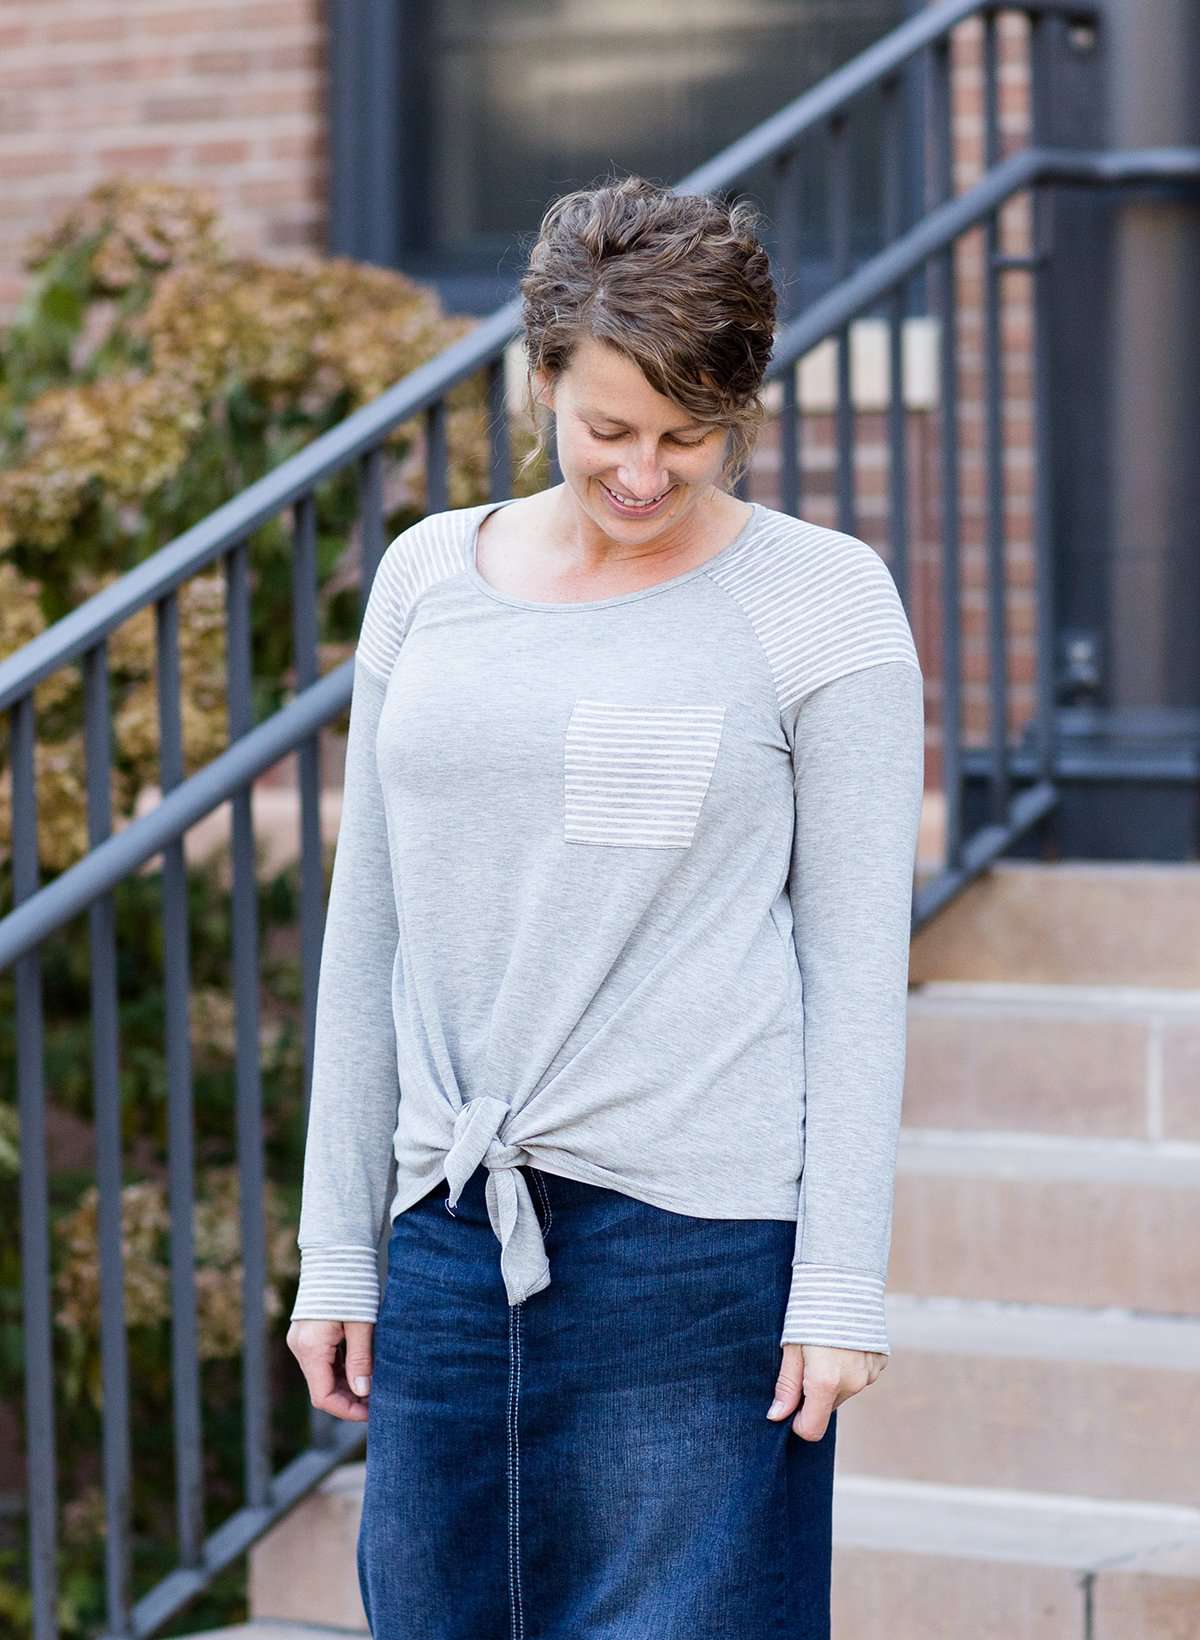 Woman wearing a gray tri blend top that has a striped pocket and a front tie.